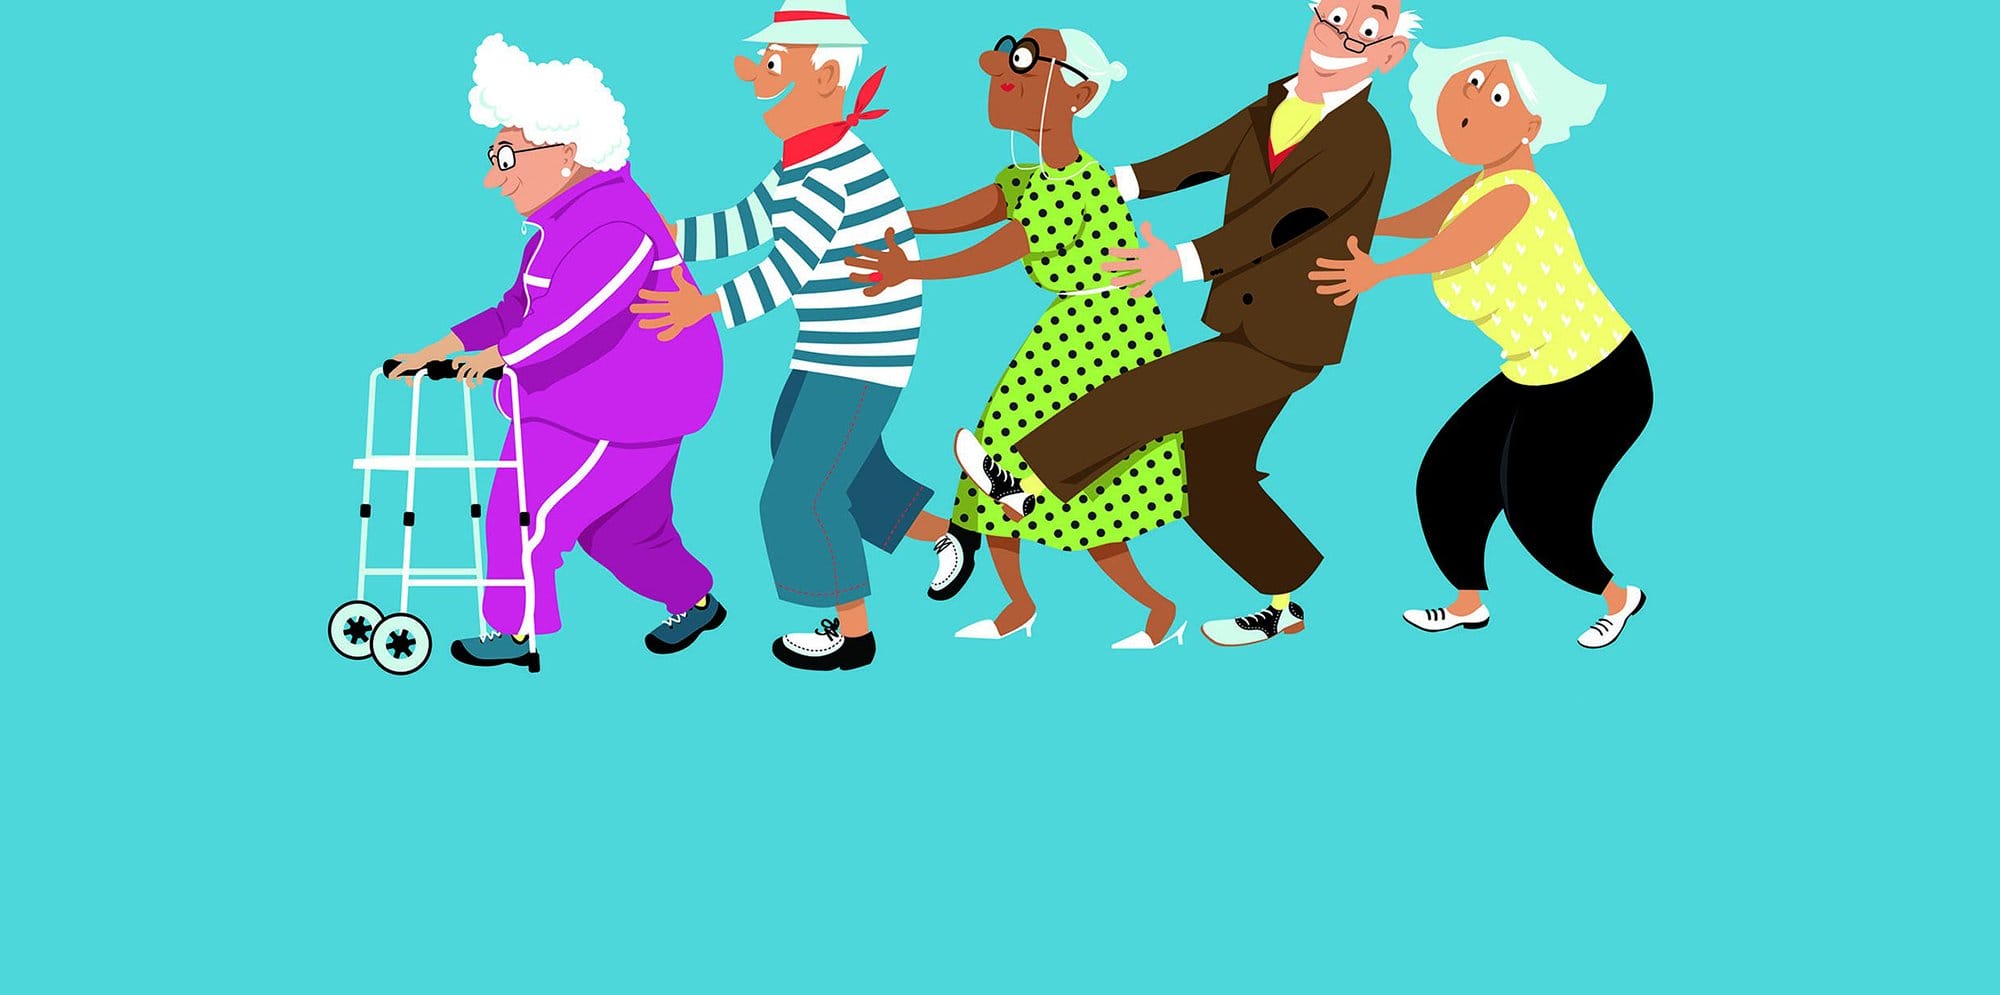 A cartoon illustration shows five older people in a cheerful conga line against a turquoise background. They all have different colourful outfits and hairstyles.